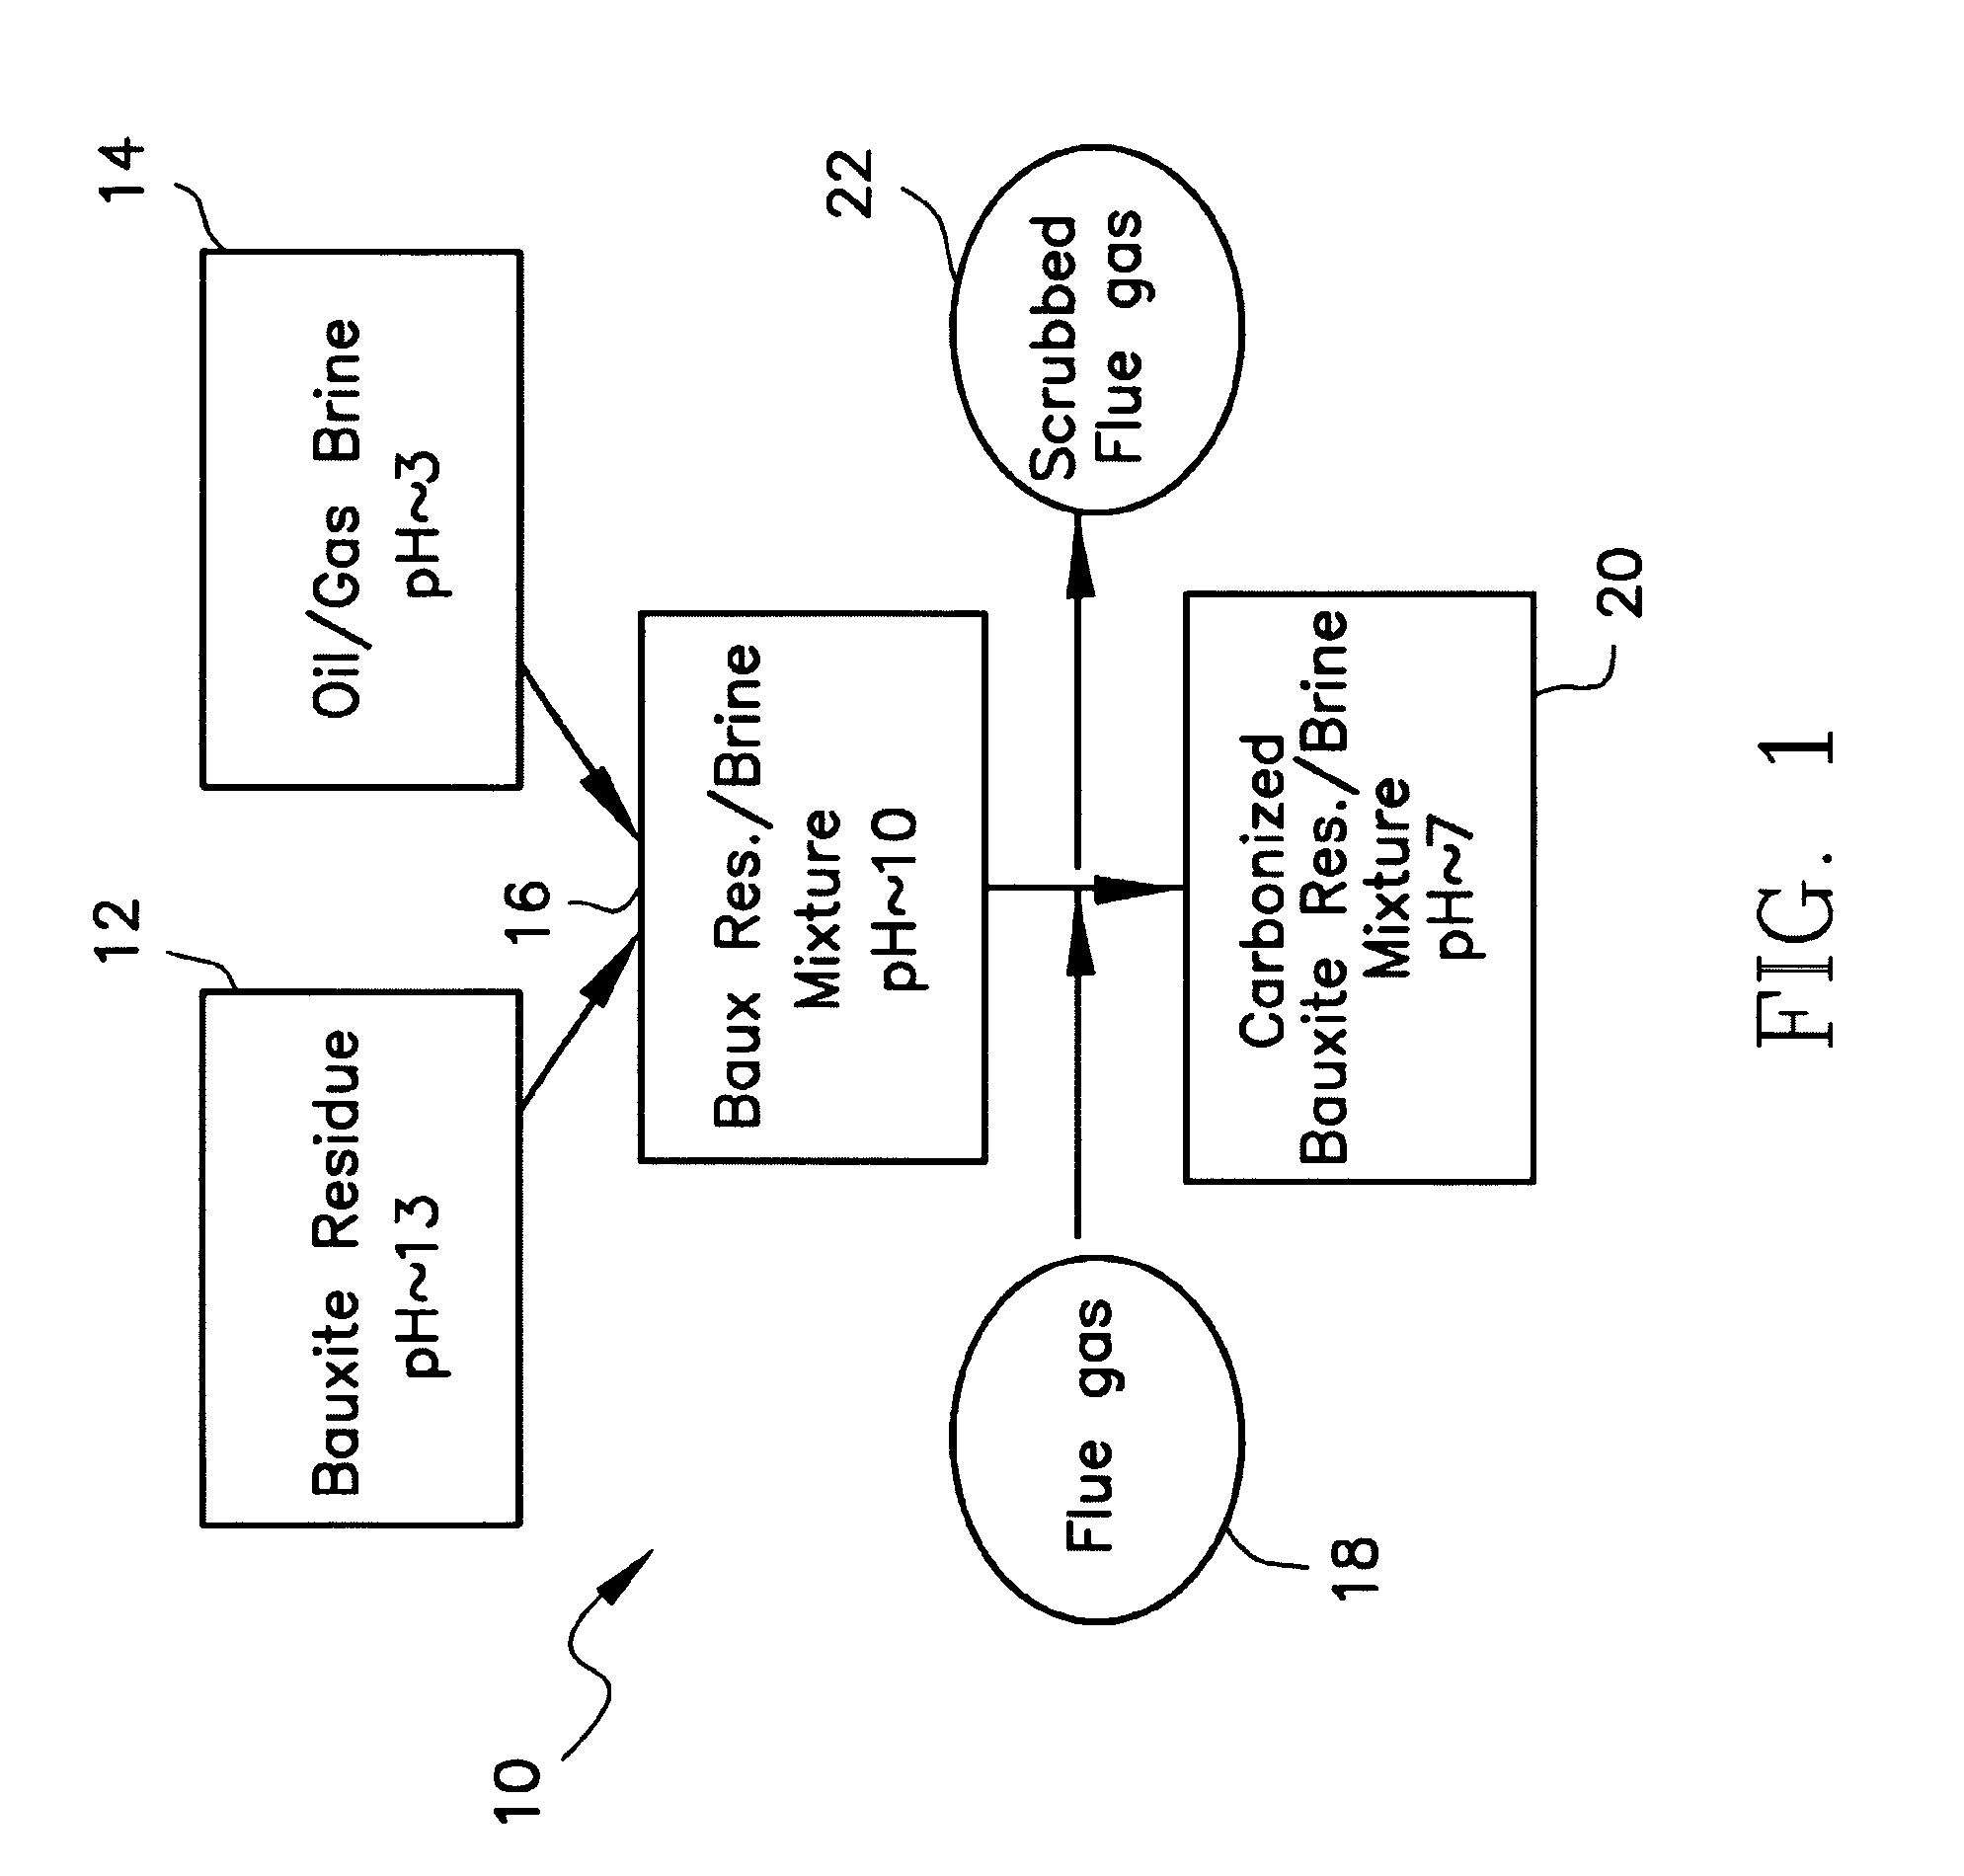 Method for sequestering CO2 and SO2 utilizing a plurality of waste streams